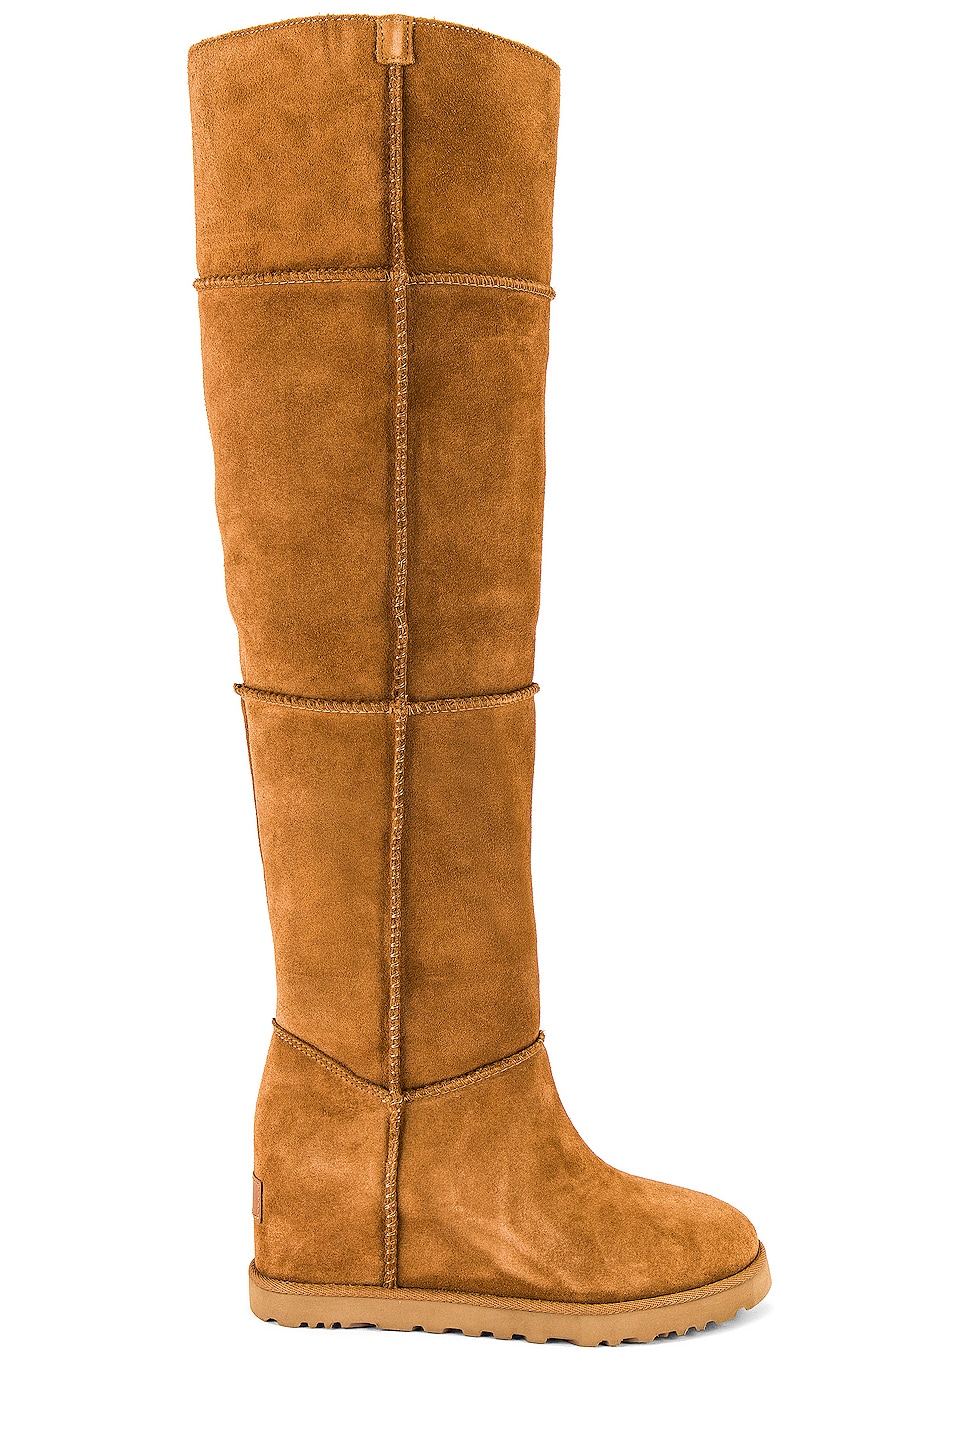 UGG Classic Femme Over The Knee Shearling Boot in Chestnut | REVOLVE